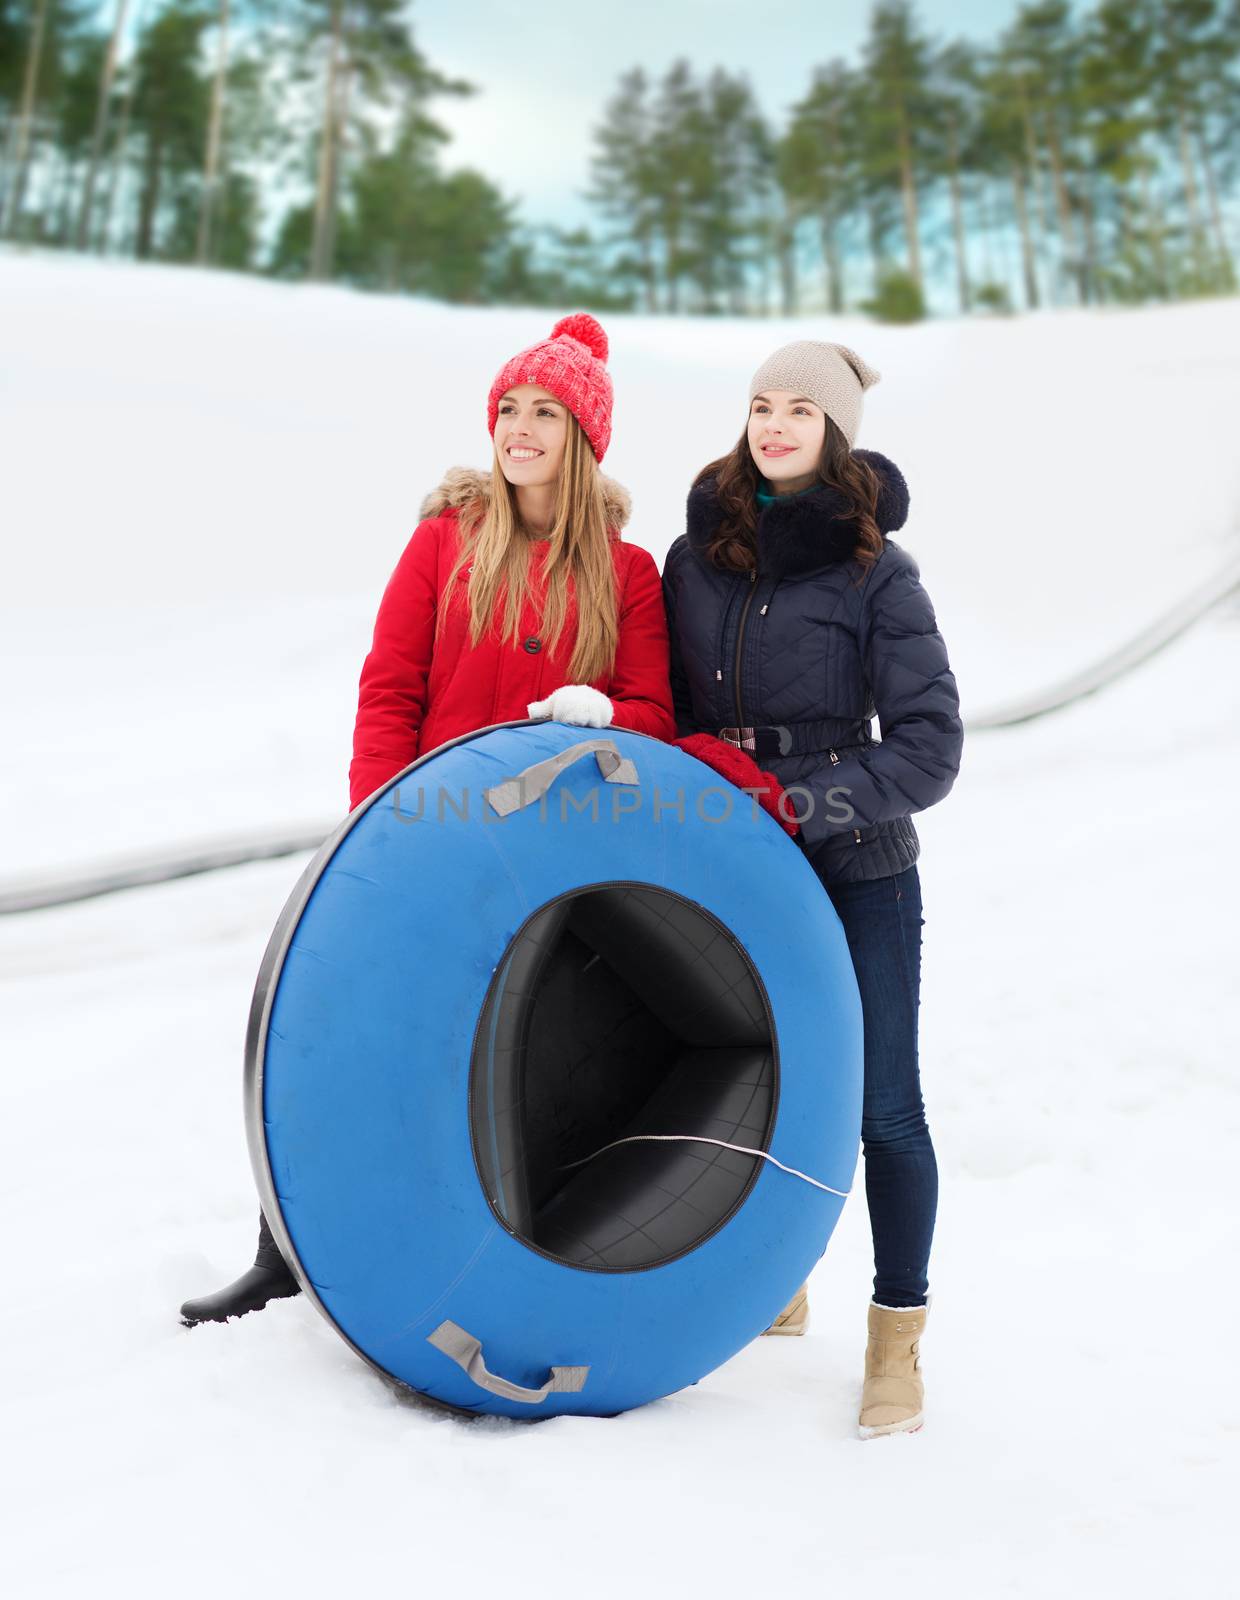 winter, leisure, sport, friendship and people concept - happy girl friends with snow tubes outdoors